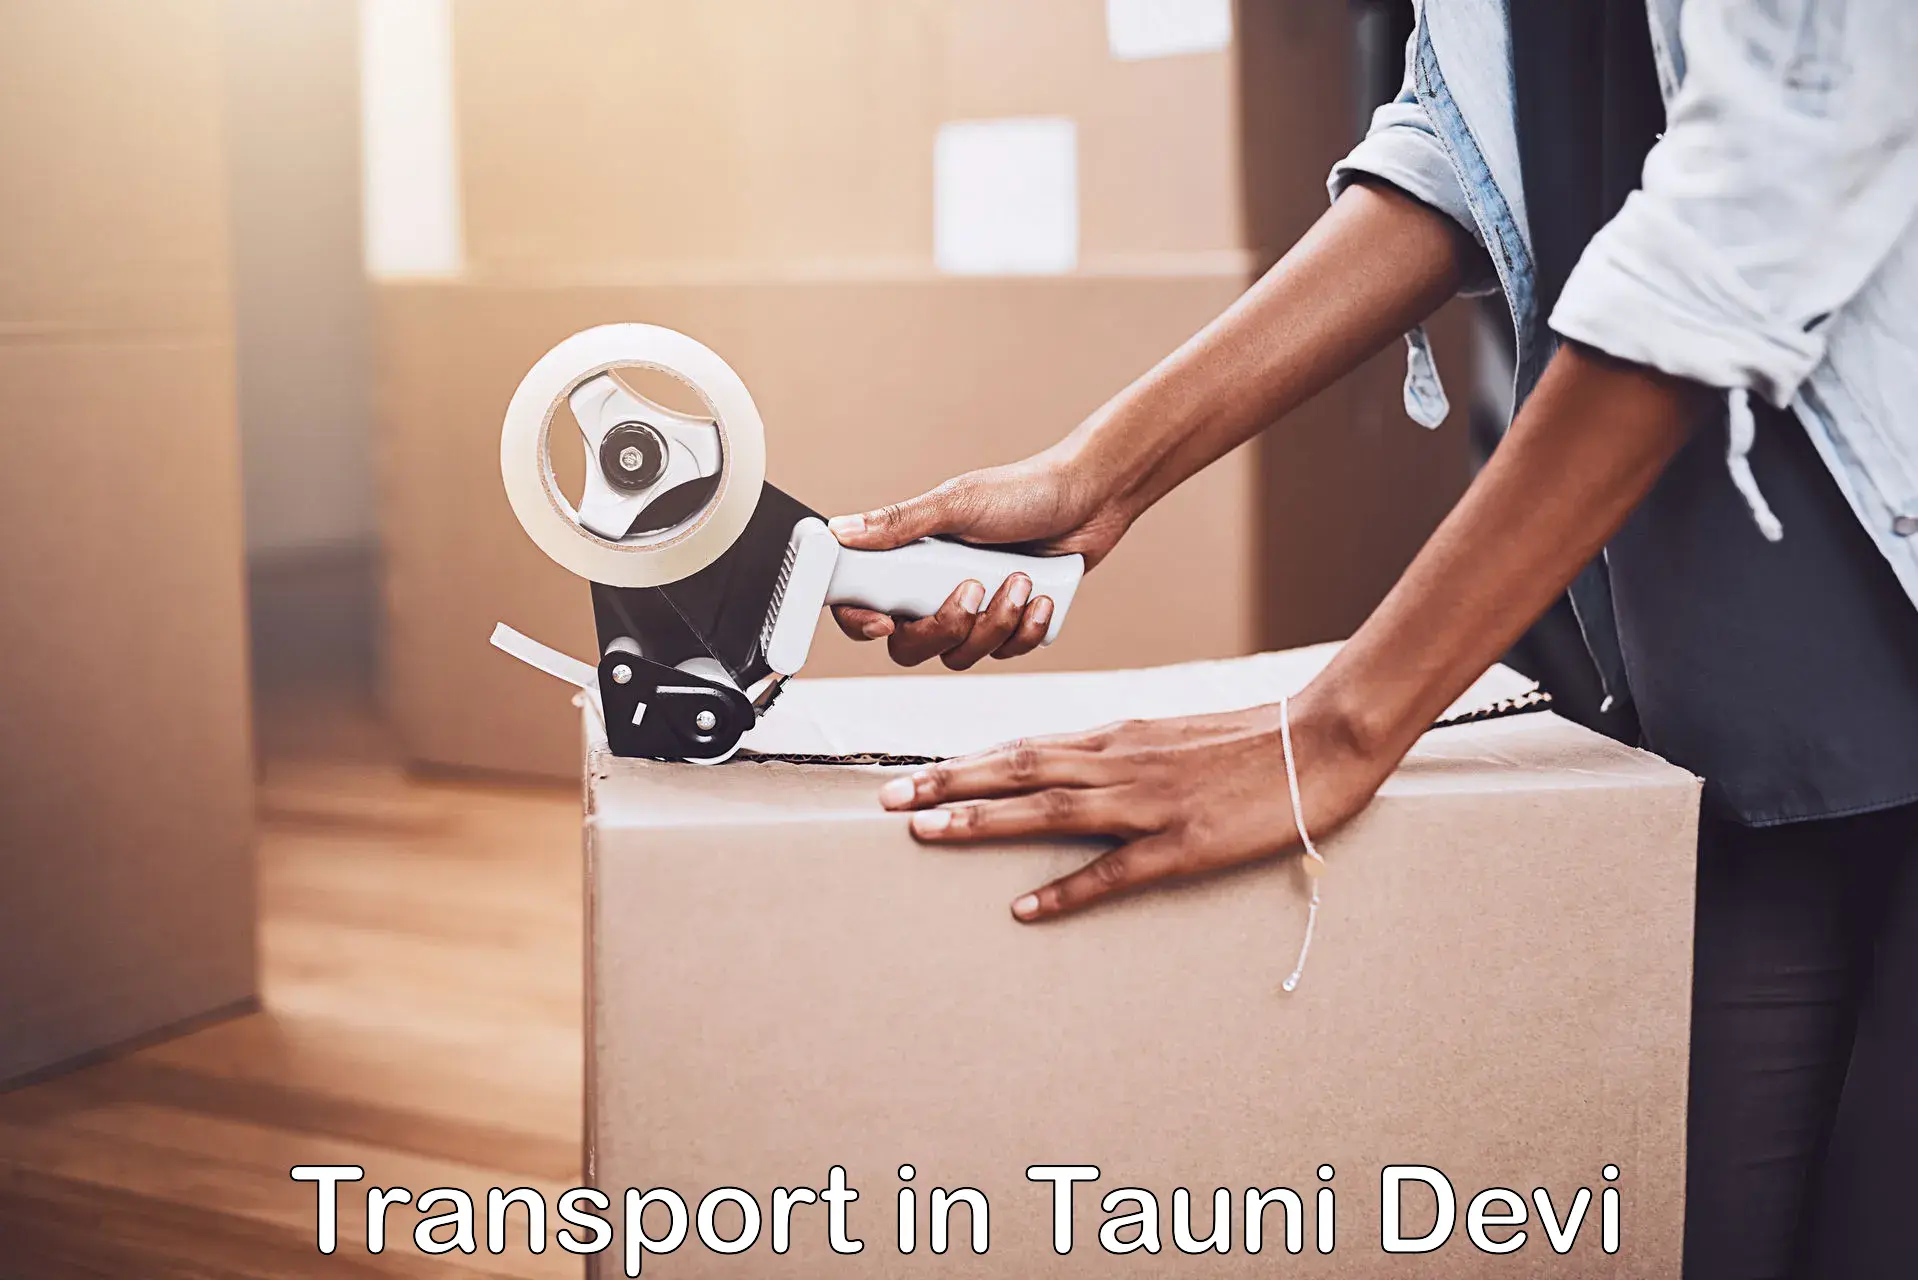 Daily parcel service transport in Tauni Devi